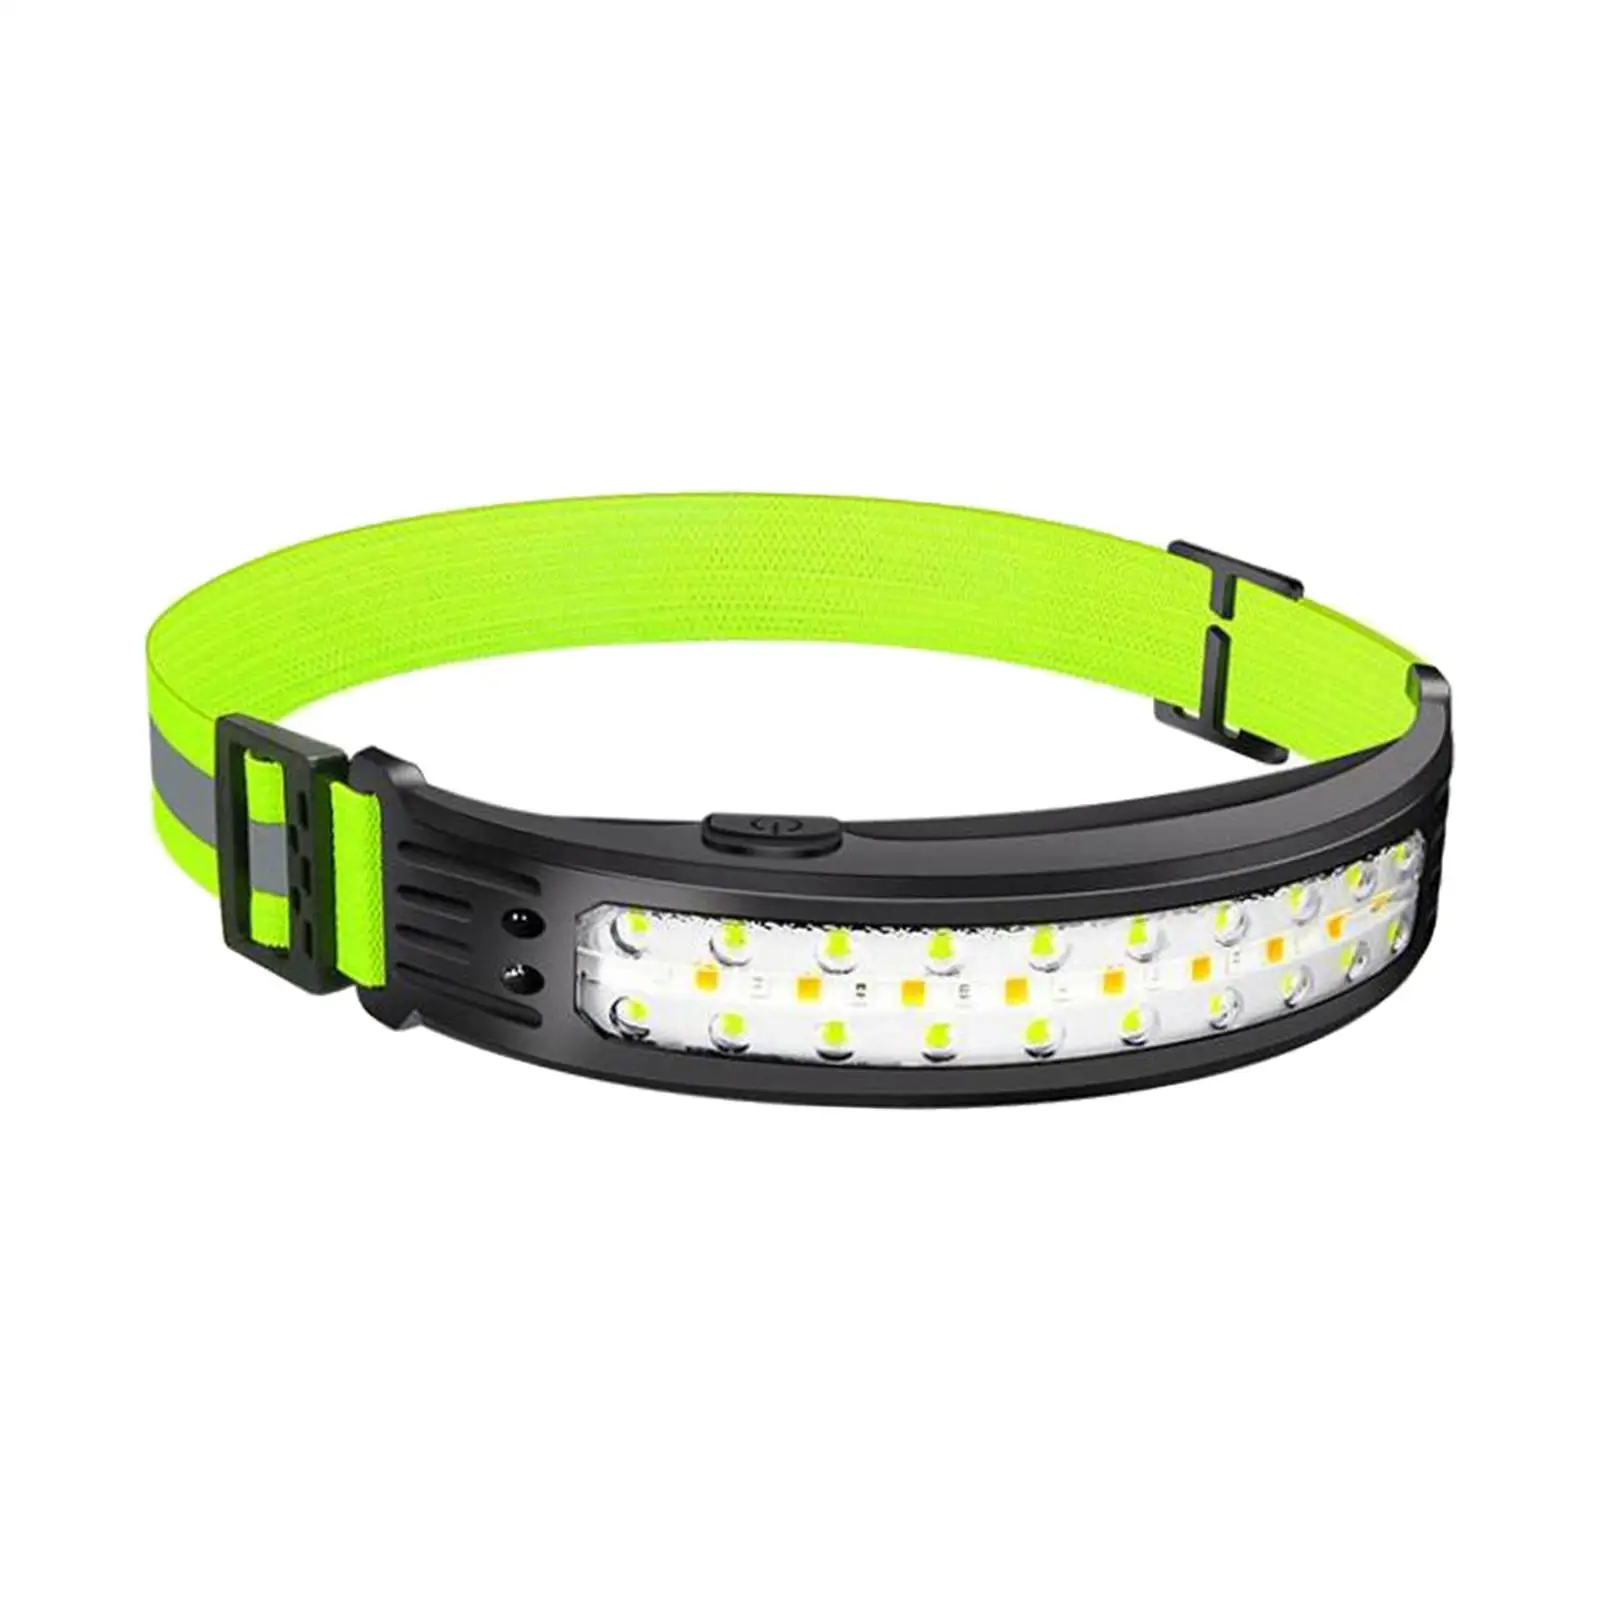 LED Headlamp Flashlight Wide Beam Head Torch for Running Outing Outdoor